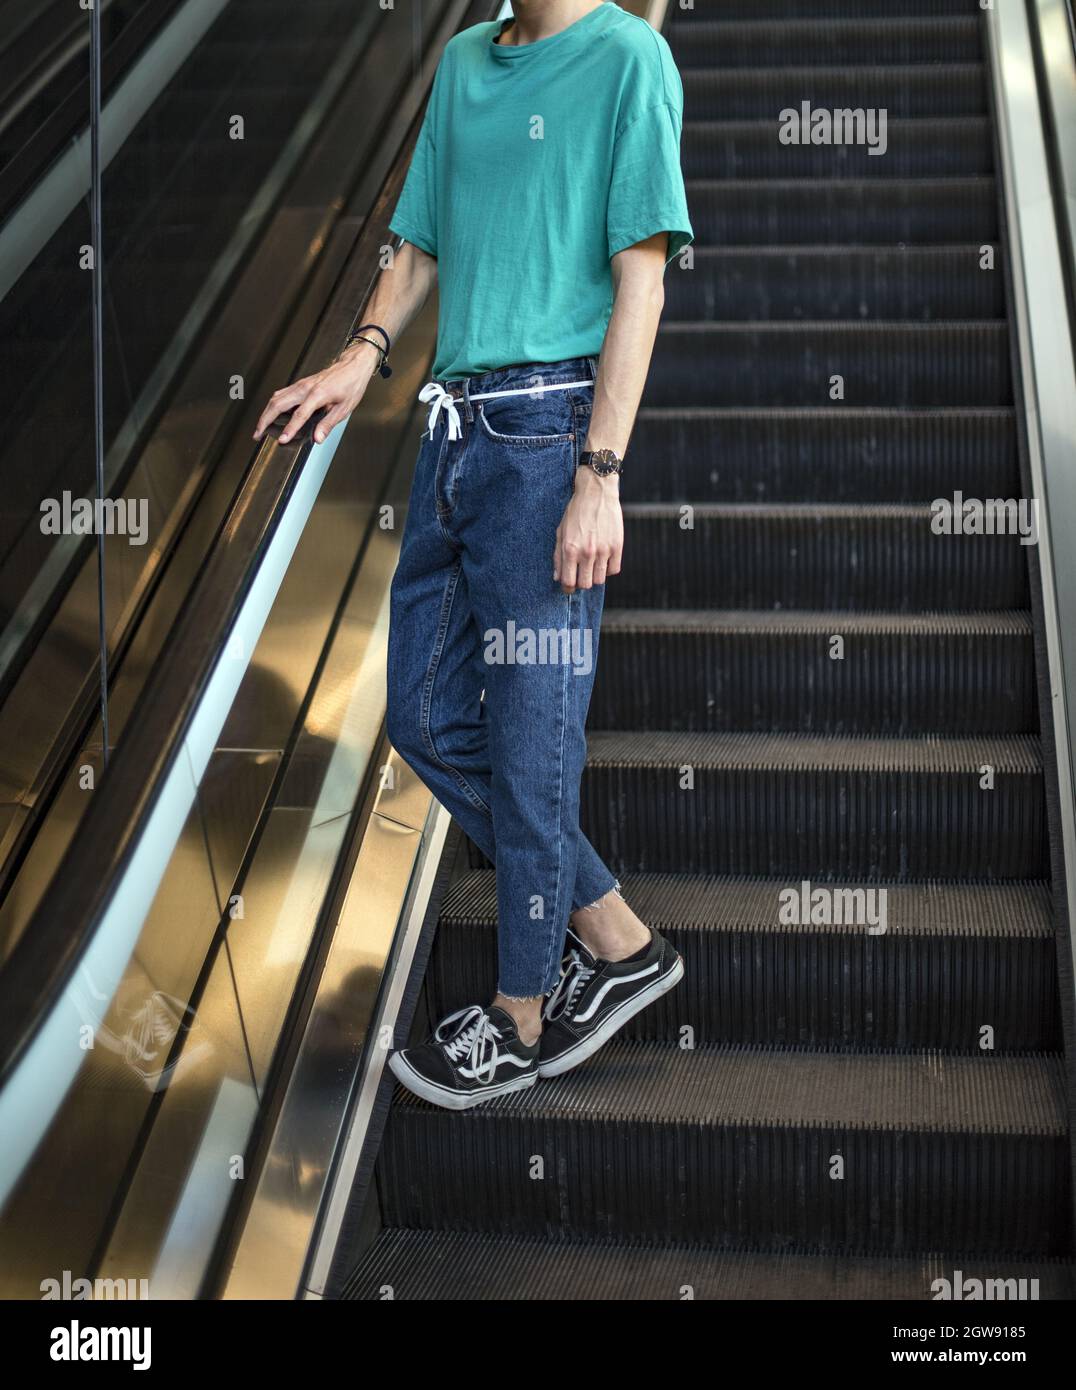 Young Man Wearing Vans Old Skool Shoes On Escalators In The Mall Stock  Photo - Alamy